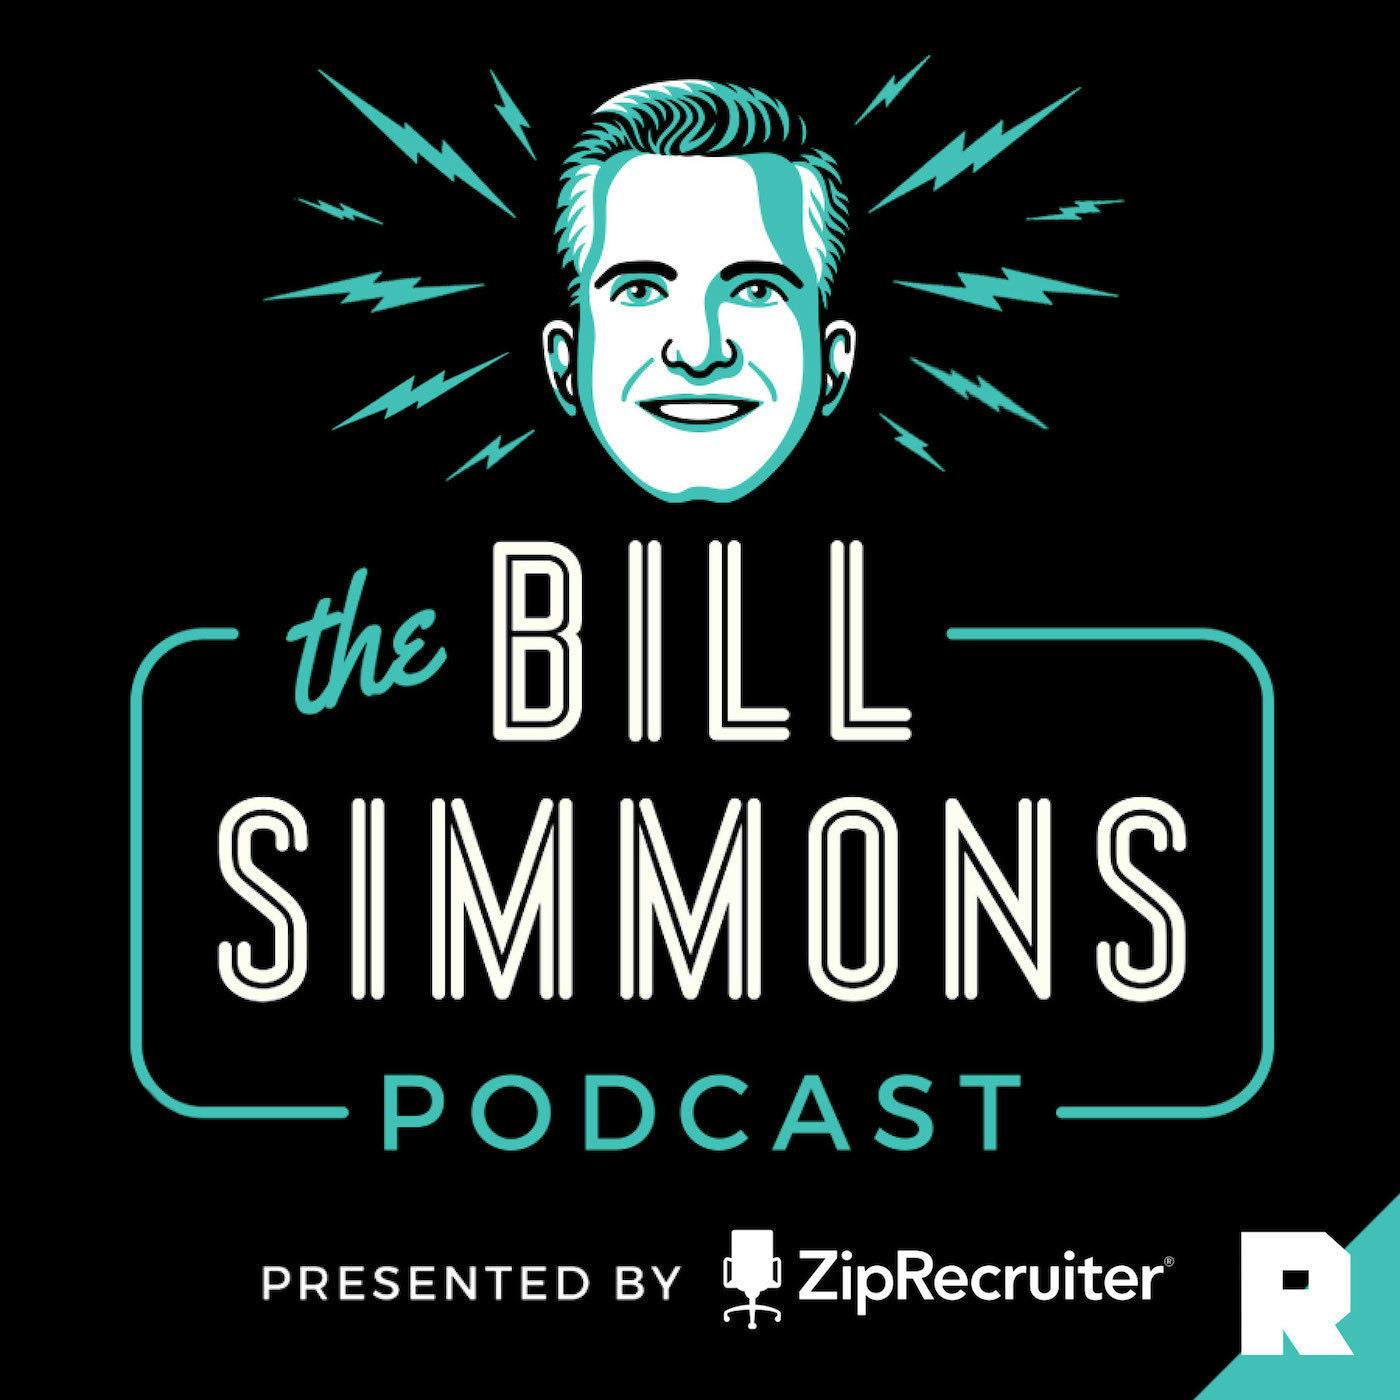 LeBron Believes (Again), Philly’s Big Test, and a Chaotic Summer Coming With Brian Windhorst | The Bill Simmons Podcast (Ep. 360)